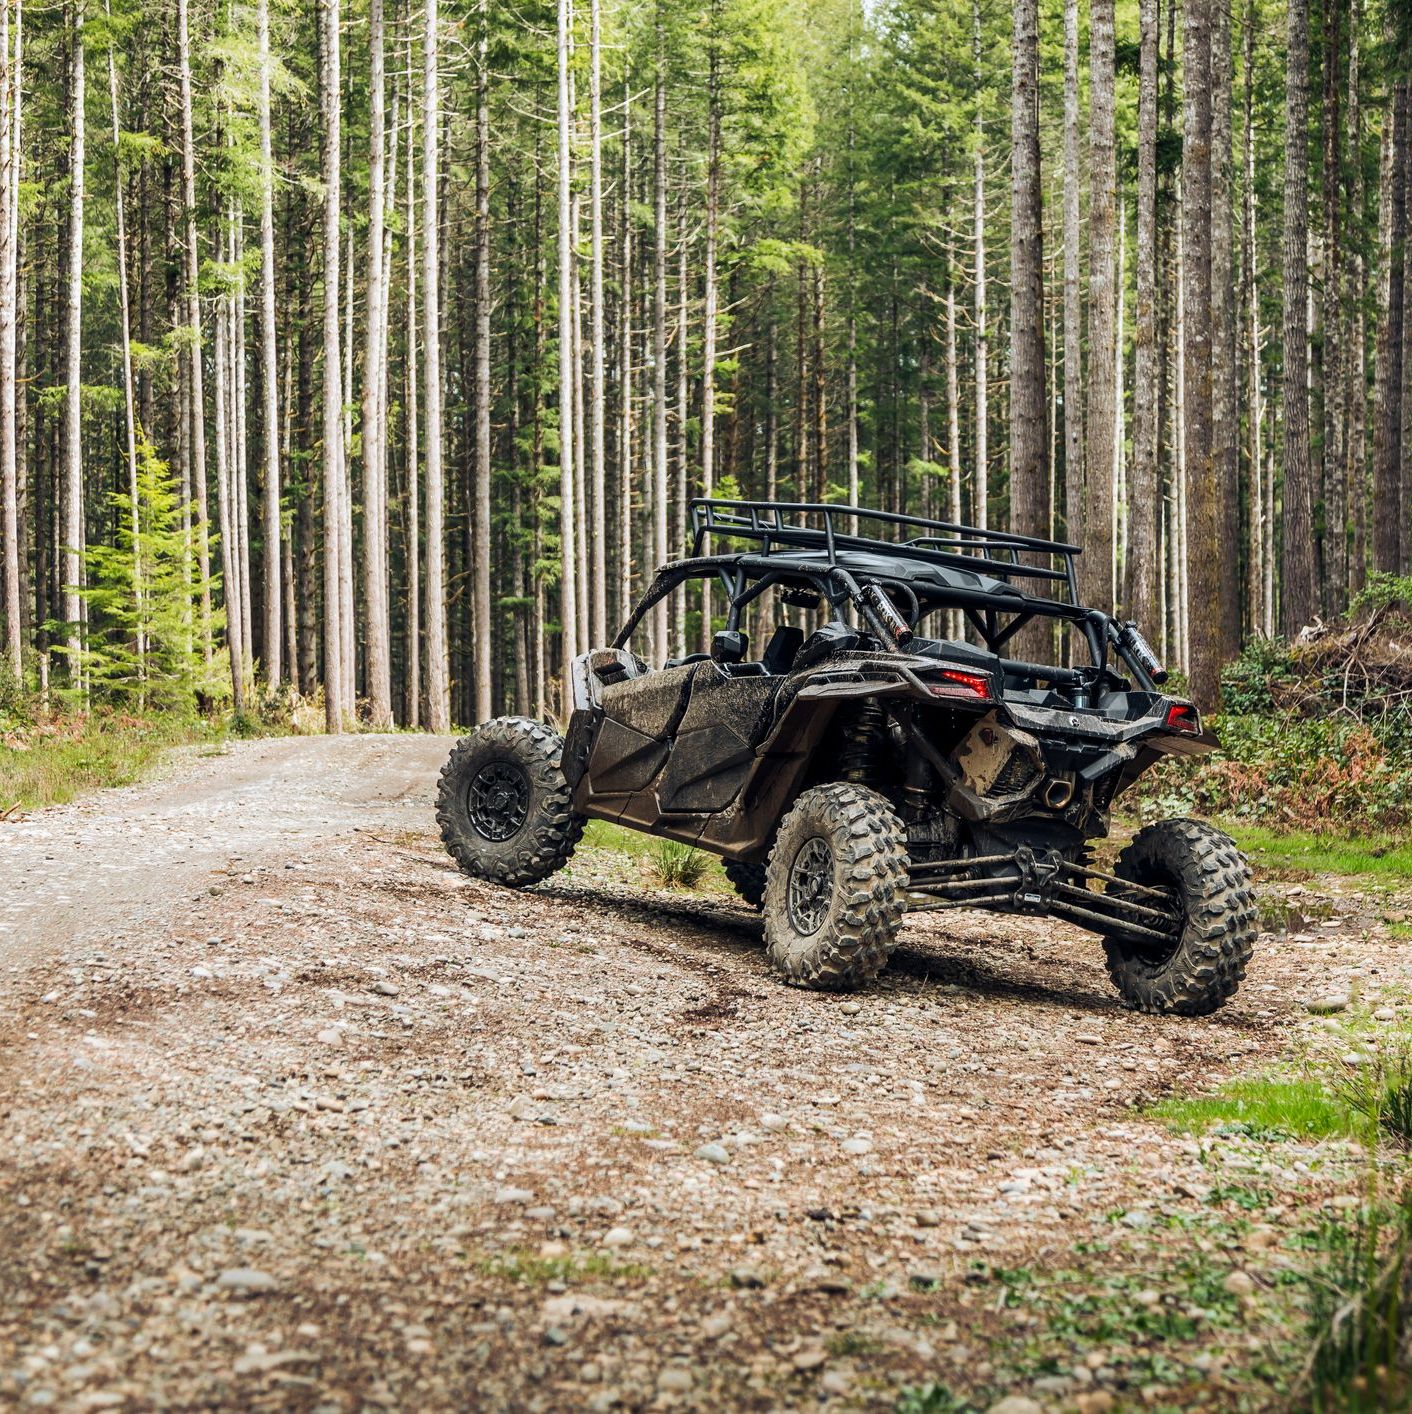 UTV or Side by side in the woods